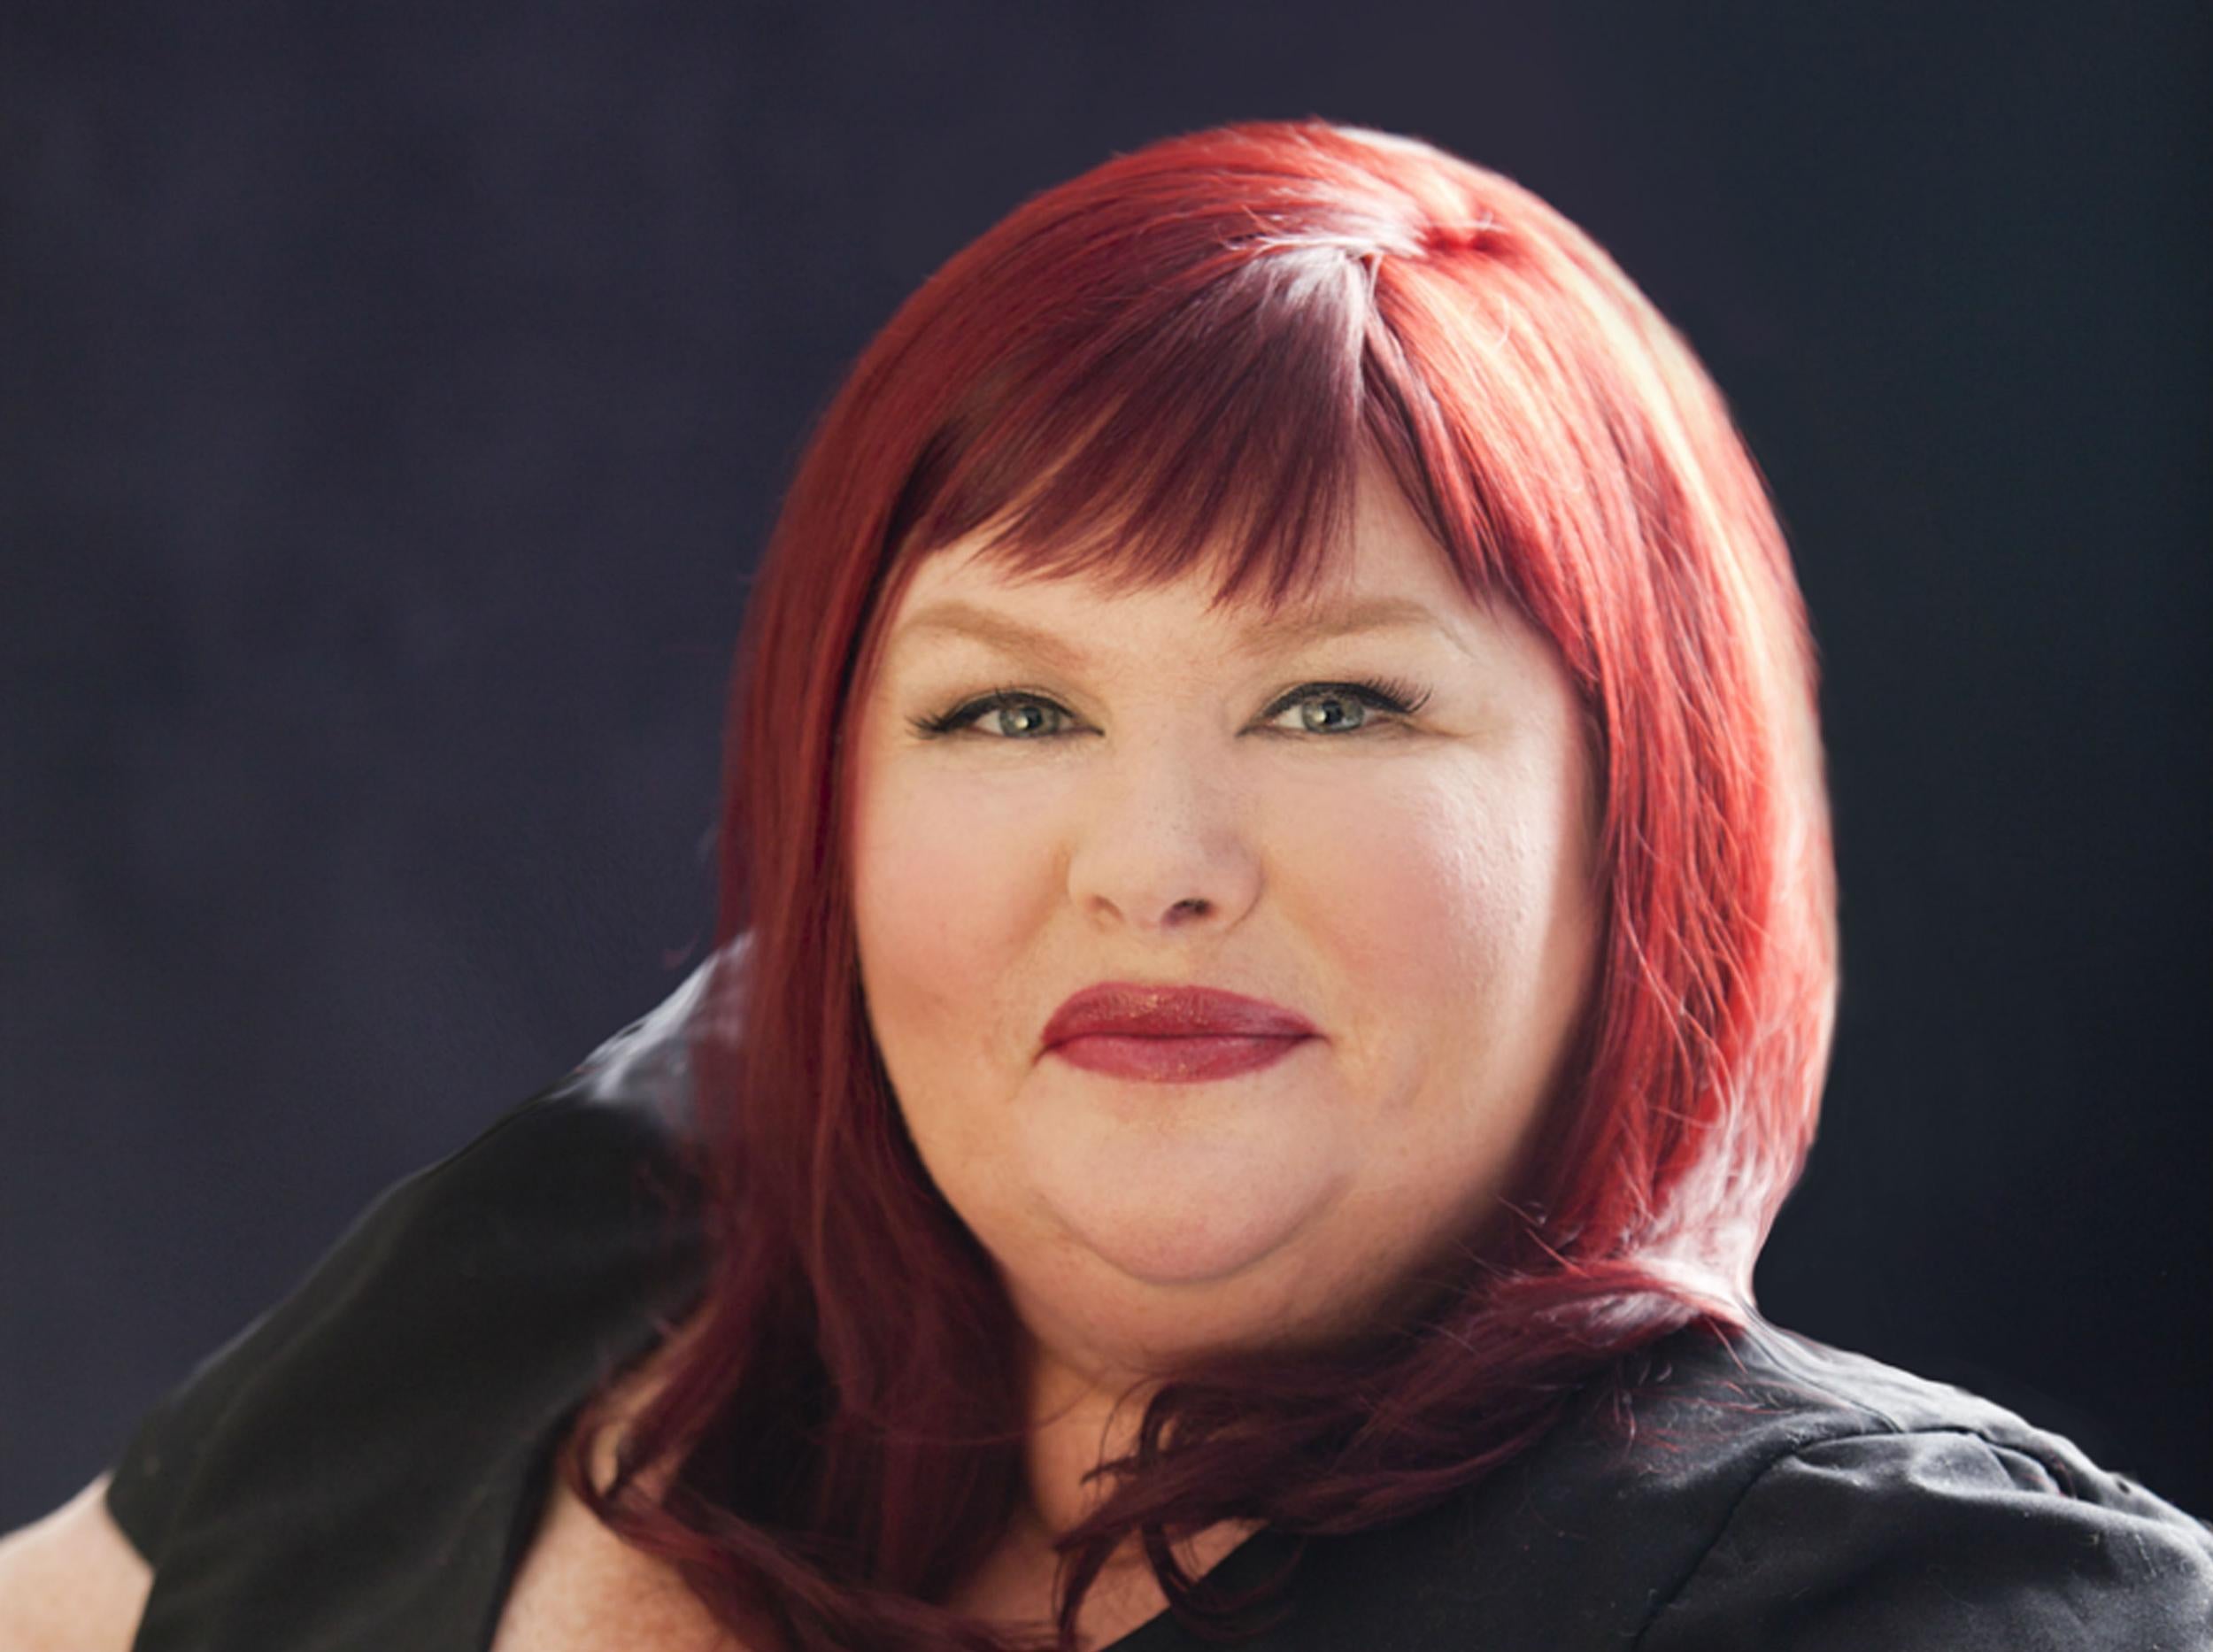 Mortal Instruments': How Author Cassandra Clare Helped Bring the